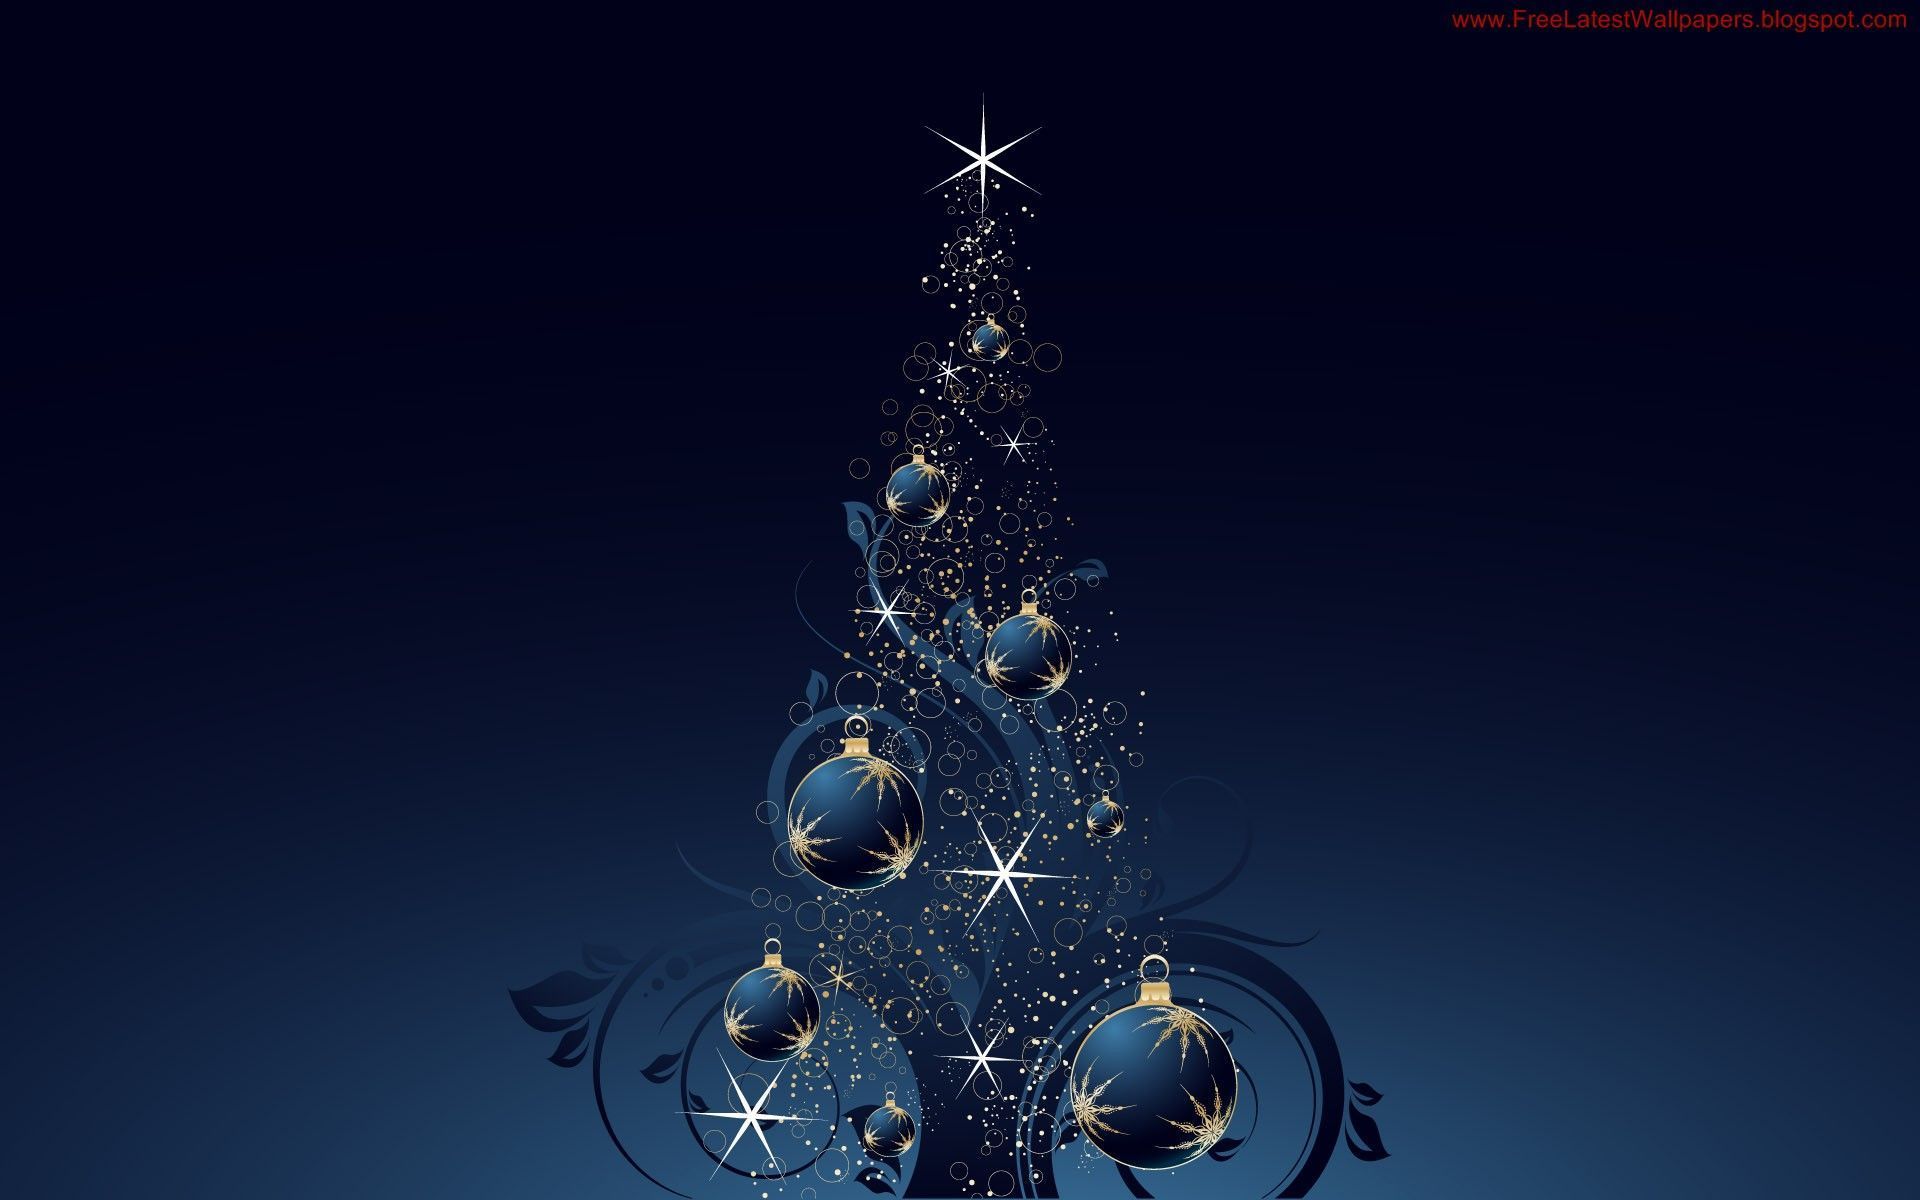 Christmas wallpaper hd - images, photos, pics, pictures | Full ...